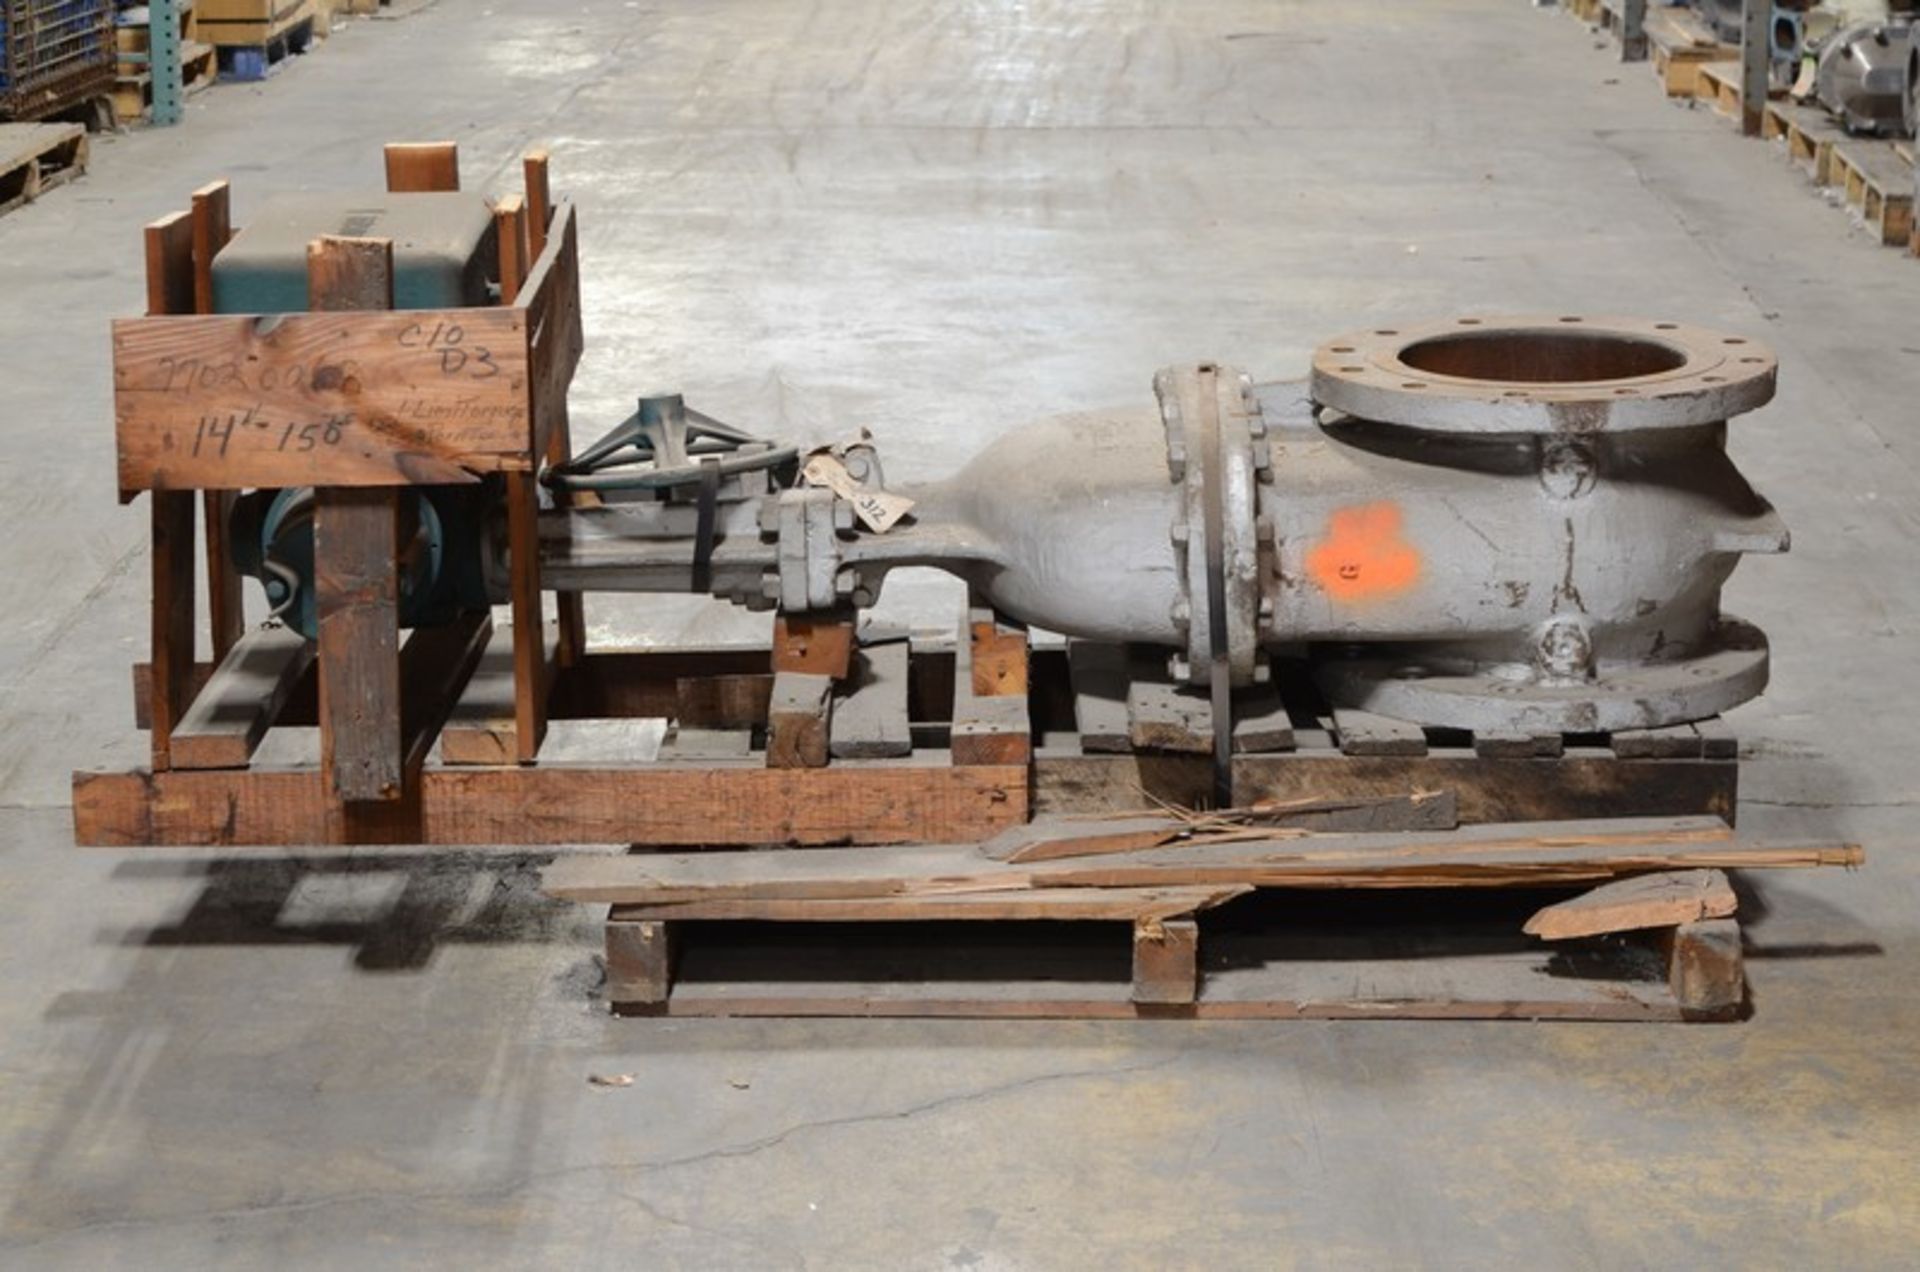 14" Steel Valve RF with Limitorque Motor (Loading Fee $25) (Located Lebanon, PA) - Image 5 of 5